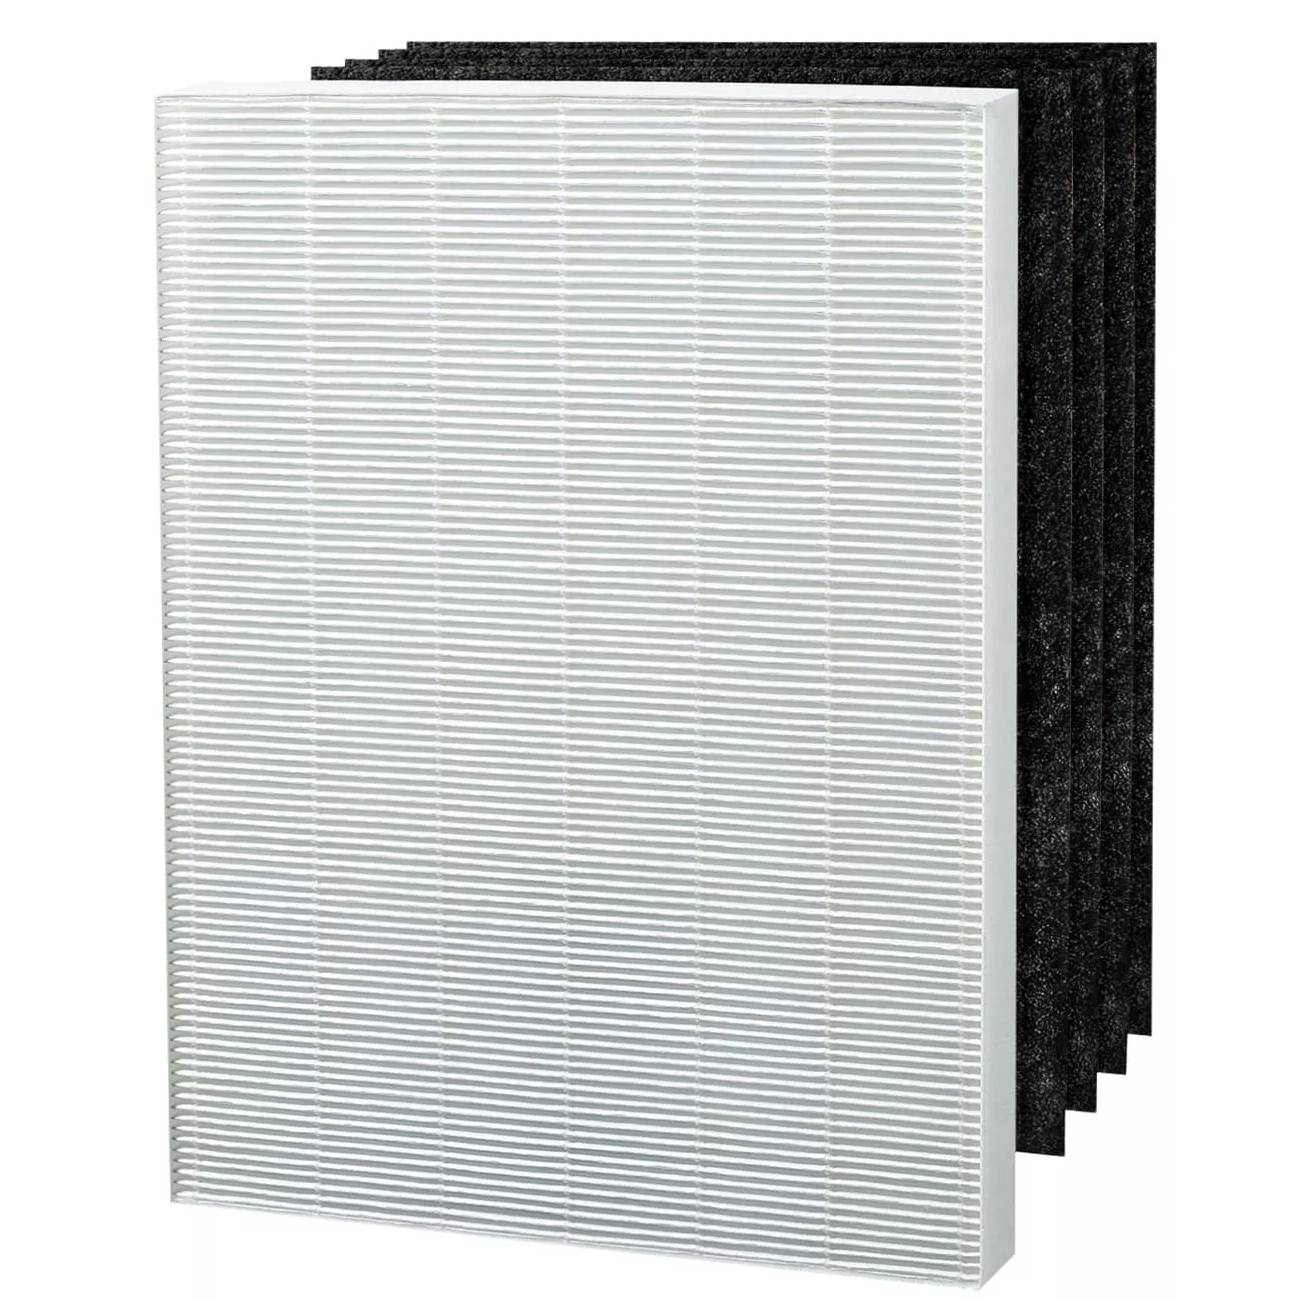 Winix 113050 Replacement Filter C Carbon Pre-Filters